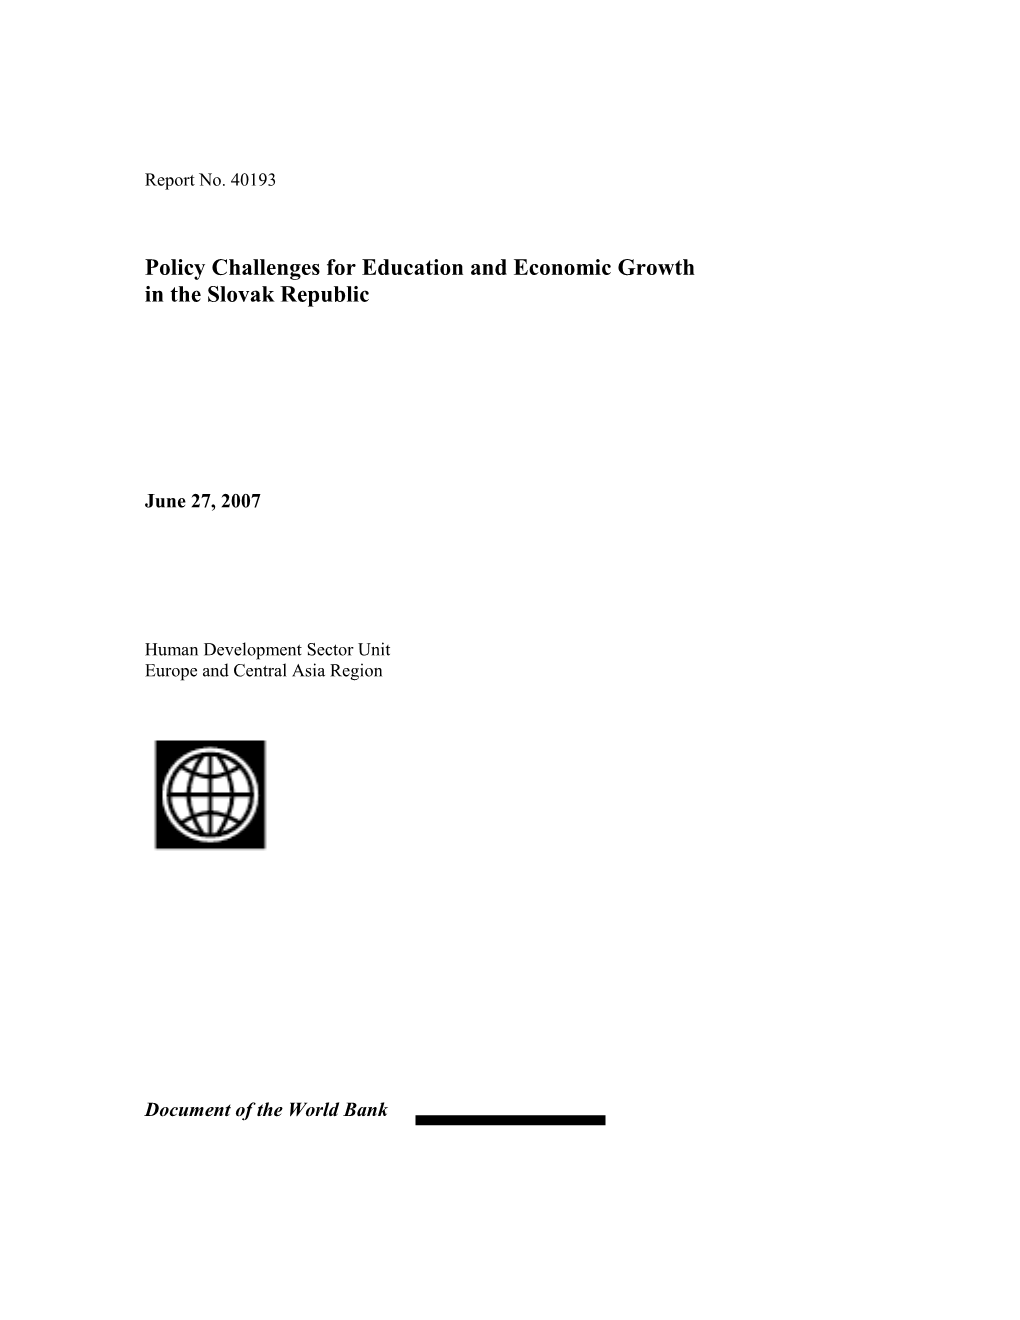 Policy Challenges for Education and Economic Growth